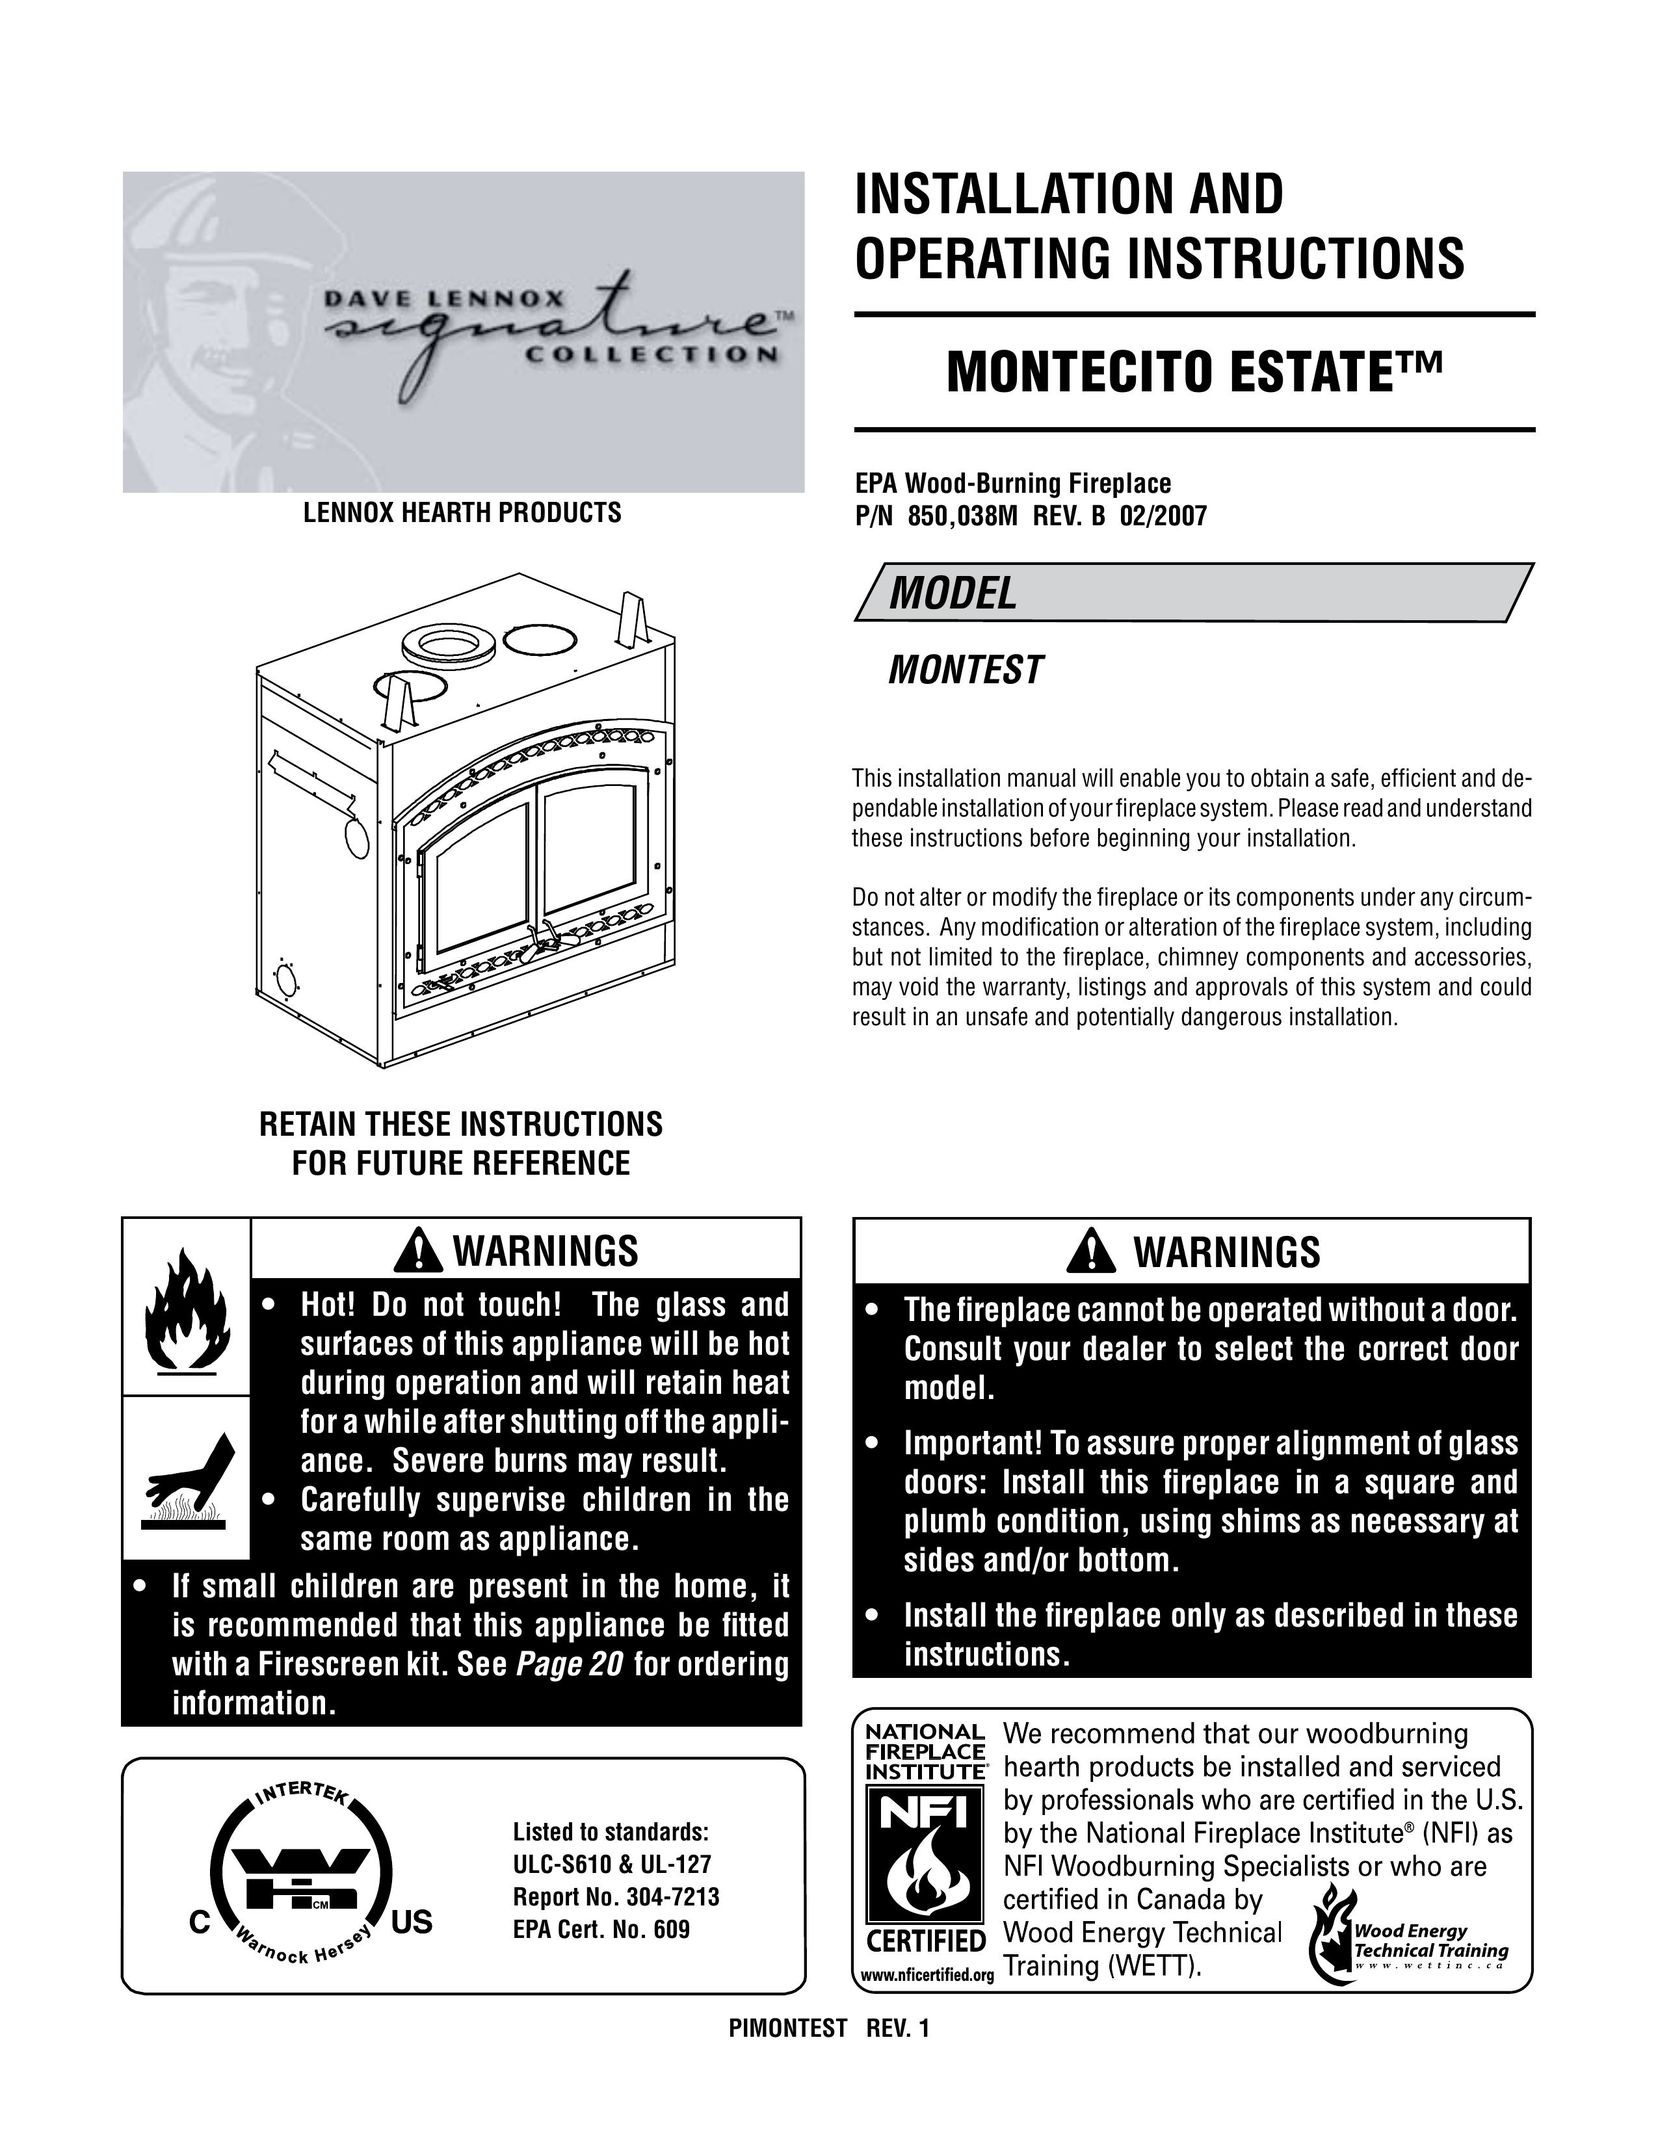 Lennox Hearth 038M Indoor Fireplace User Manual